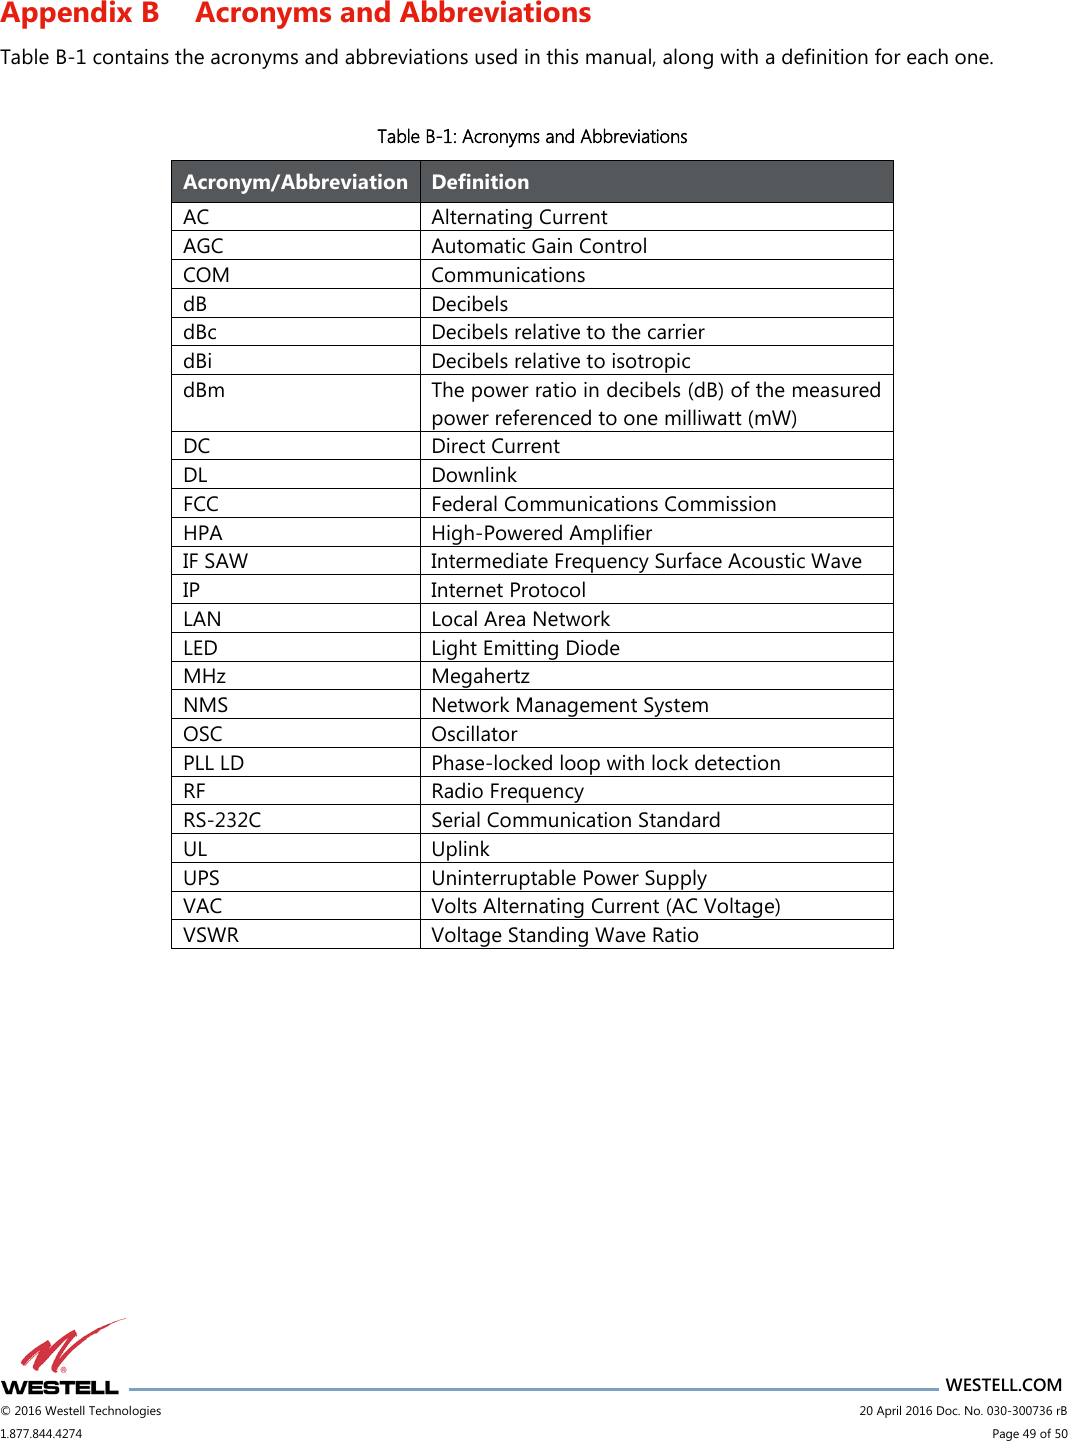                      WESTELL.COM © 2016 Westell Technologies                             20 April 2016 Doc. No. 030-300736 rB 1.877.844.4274                             Page 49 of 50  Appendix B Acronyms and Abbreviations Table B-1 contains the acronyms and abbreviations used in this manual, along with a definition for each one.  Table B-1: Acronyms and Abbreviations Acronym/Abbreviation Definition AC Alternating Current AGC Automatic Gain Control COM Communications dB Decibels dBc Decibels relative to the carrier dBi Decibels relative to isotropic dBm The power ratio in decibels (dB) of the measured power referenced to one milliwatt (mW) DC Direct Current DL Downlink FCC Federal Communications Commission HPA High-Powered Amplifier IF SAW Intermediate Frequency Surface Acoustic Wave  IP Internet Protocol LAN Local Area Network LED Light Emitting Diode MHz Megahertz NMS Network Management System OSC Oscillator PLL LD Phase-locked loop with lock detection RF Radio Frequency RS-232C Serial Communication Standard UL Uplink UPS Uninterruptable Power Supply VAC Volts Alternating Current (AC Voltage) VSWR Voltage Standing Wave Ratio     